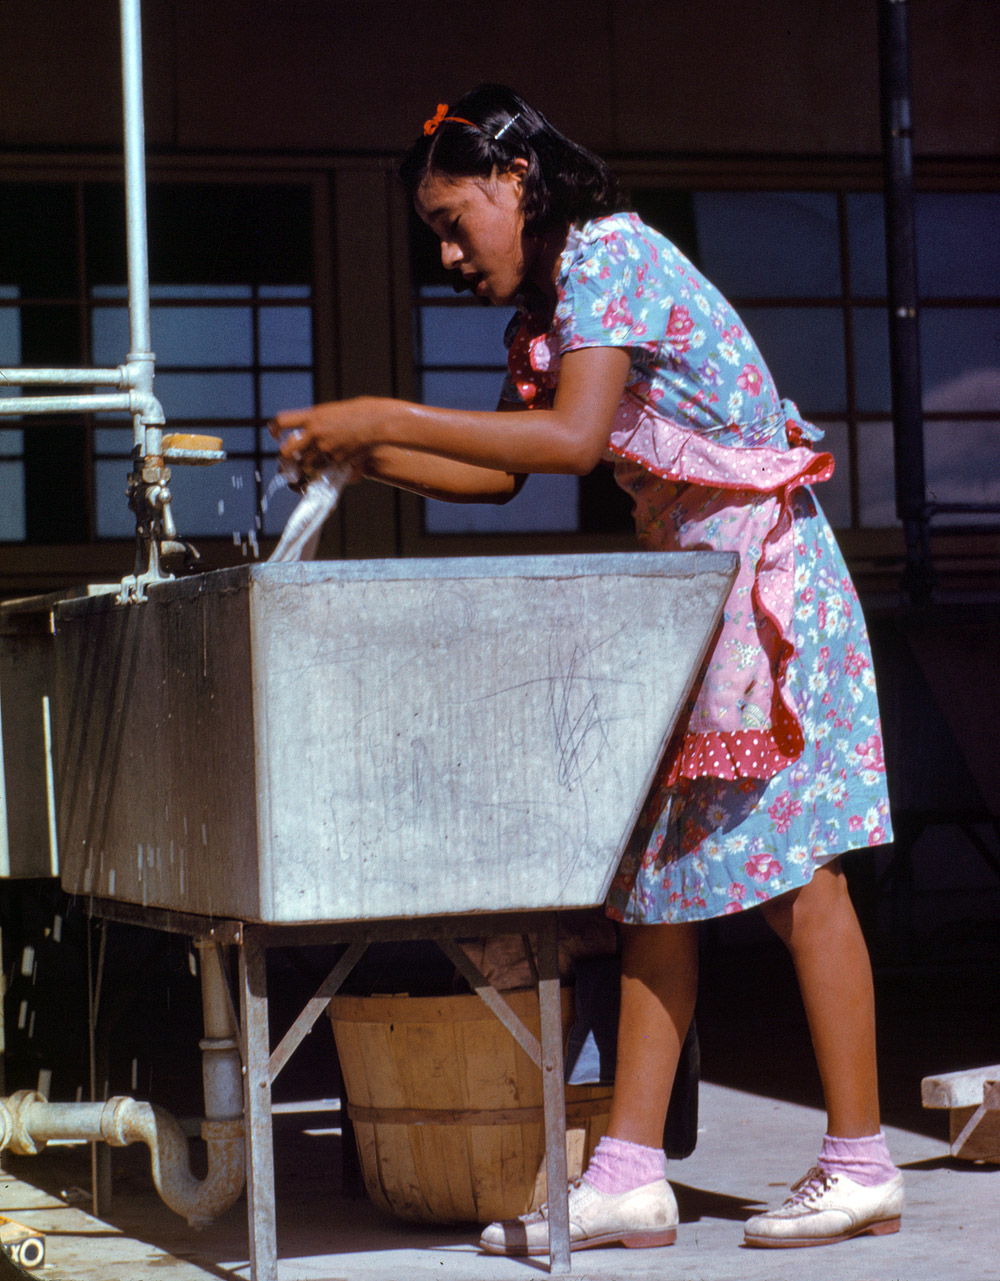 January 1942. Young woman at the community laundry Saturday afternoon. Farm Security Administration camp at Robstown, Texas. View full size. 35mm Kodachrome transparency by Arthur Rothstein for the FSA.